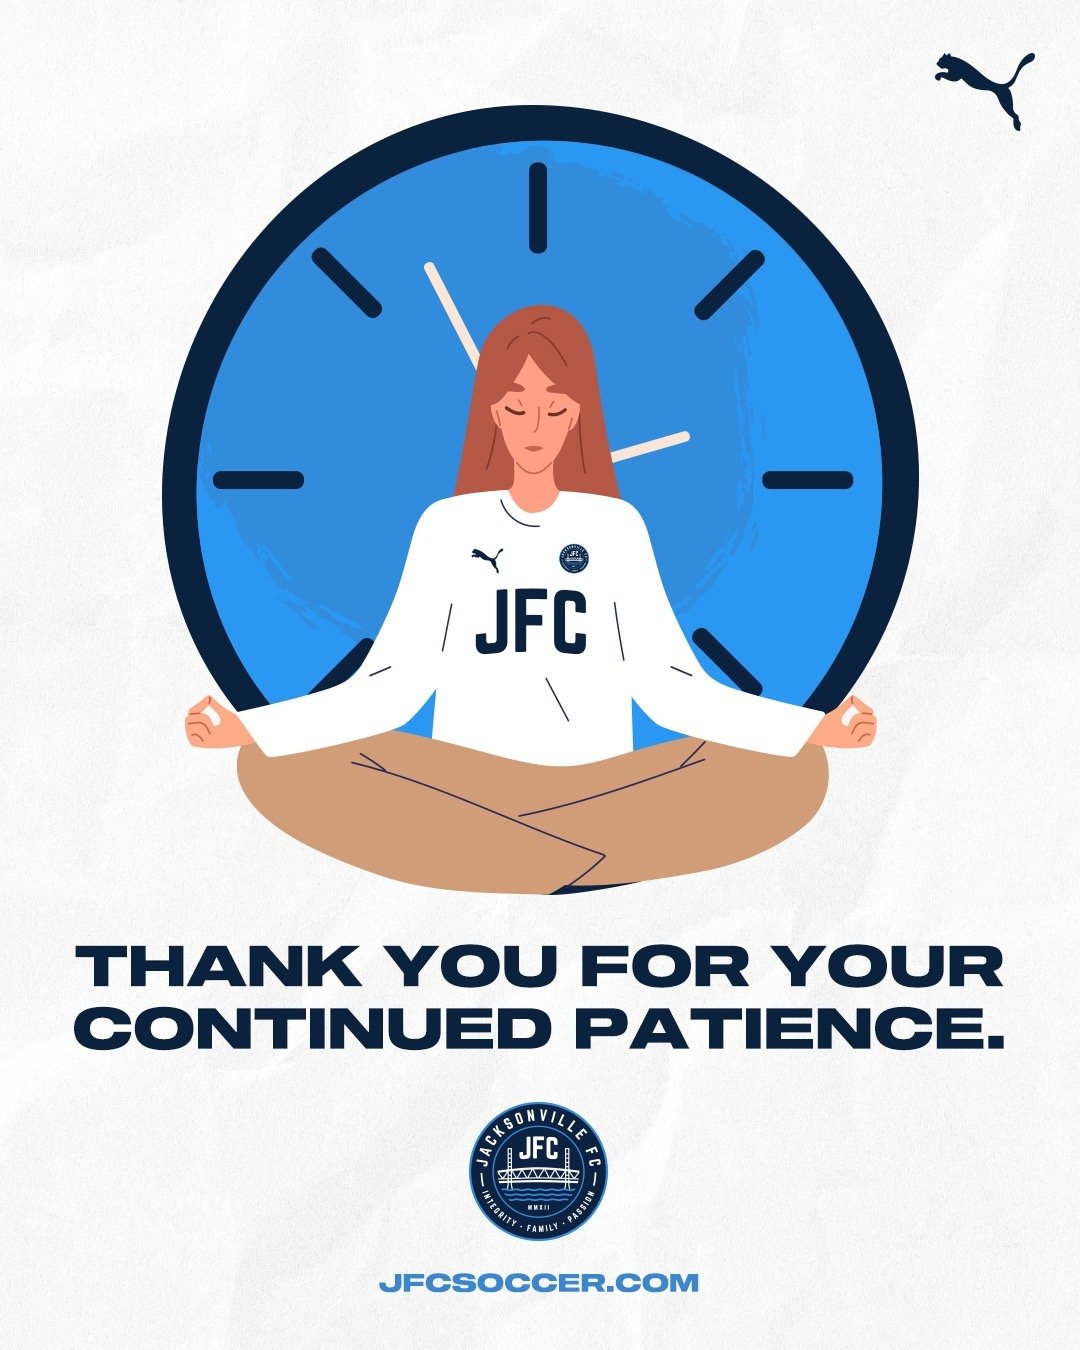 Thank you again for your patience and understanding as we work through the extensive process of organizing rosters for our JFC Competitive teams.

Our coaches are collaborating diligently to ensure each player is placed appropriately. Initial phone c